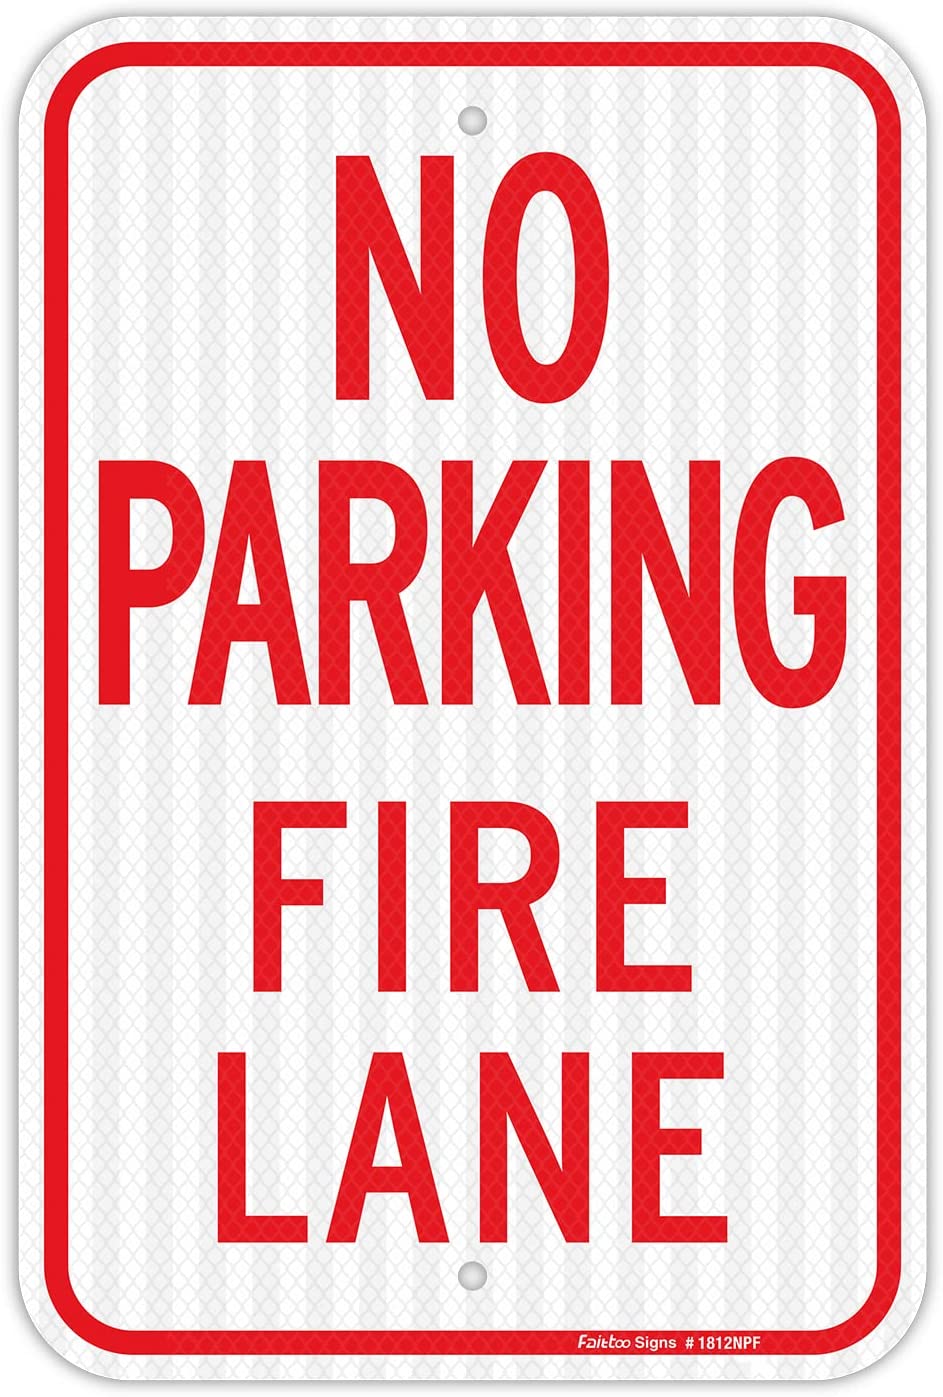 Faittoo No Parking Fire Lane Sign, 18 x 12 Inches Engineer Grade Reflective Sheeting Rust Free Aluminum, UV Protected, Weather/Fade Resistant, Easy to Install and Read, Indoor/ Outdoors Use